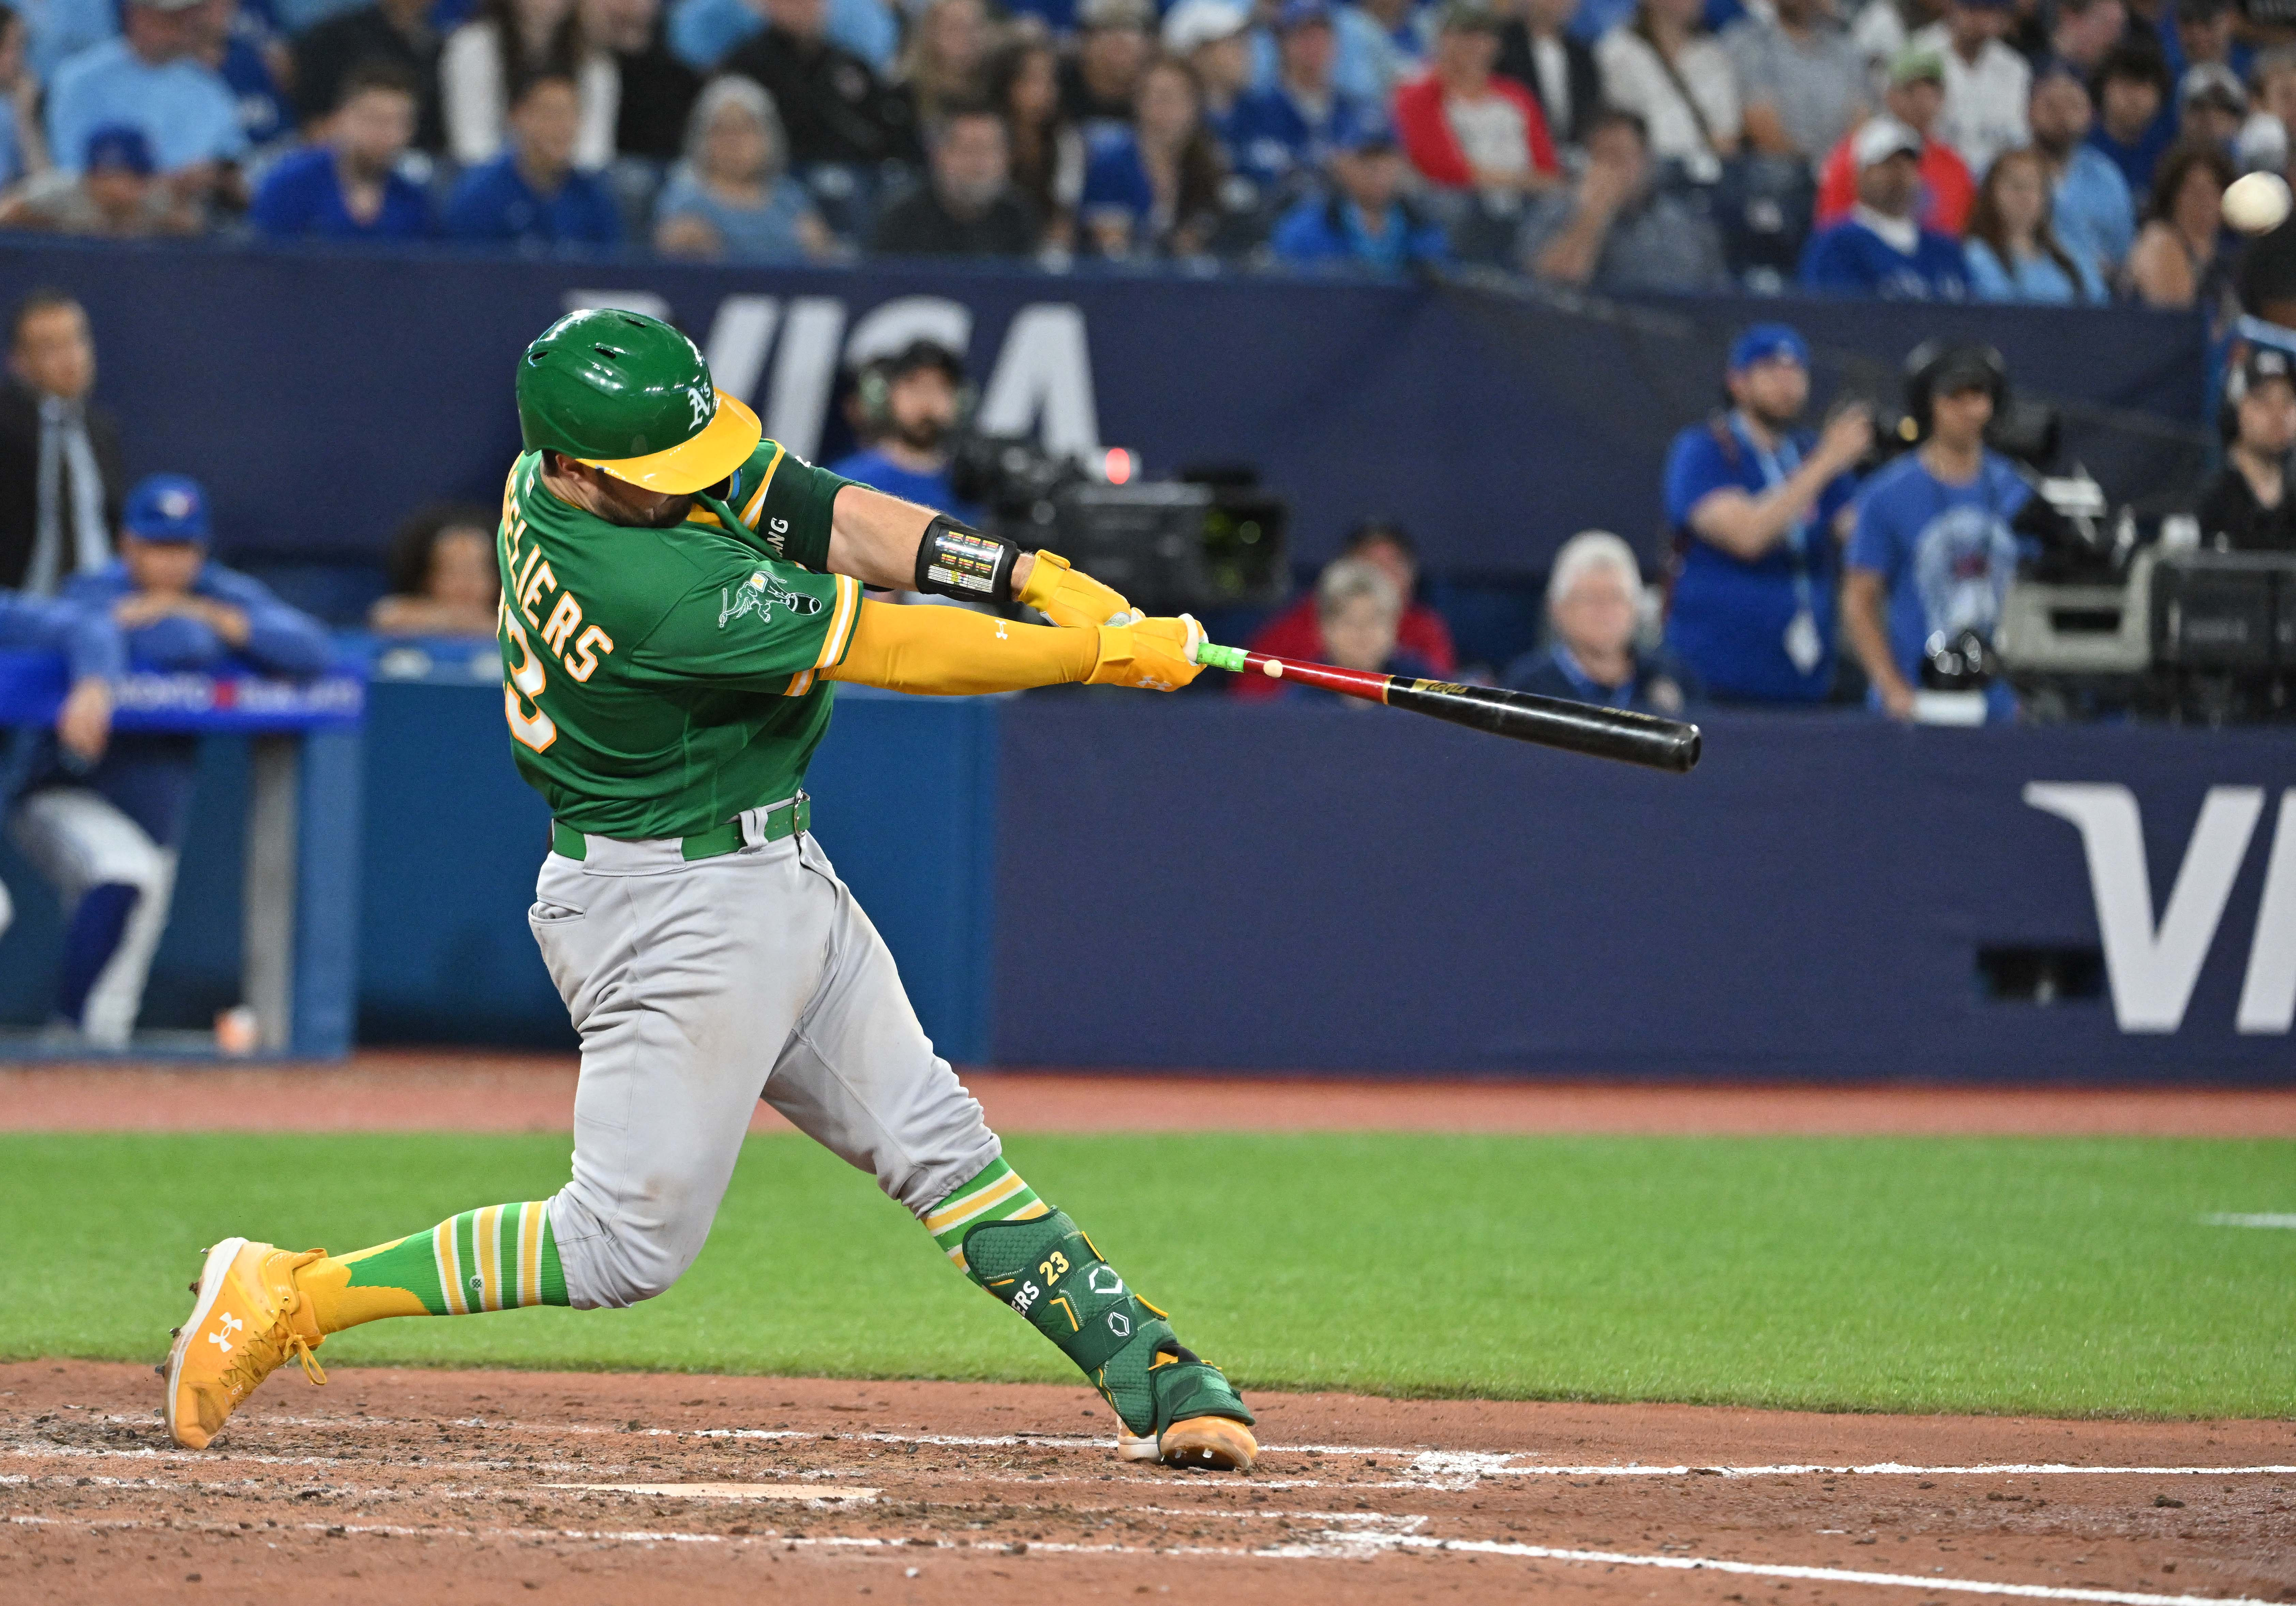 Langeliers hits game-winning HR in 9th as A's beat Blue Jays 5-4 to end  8-game skid